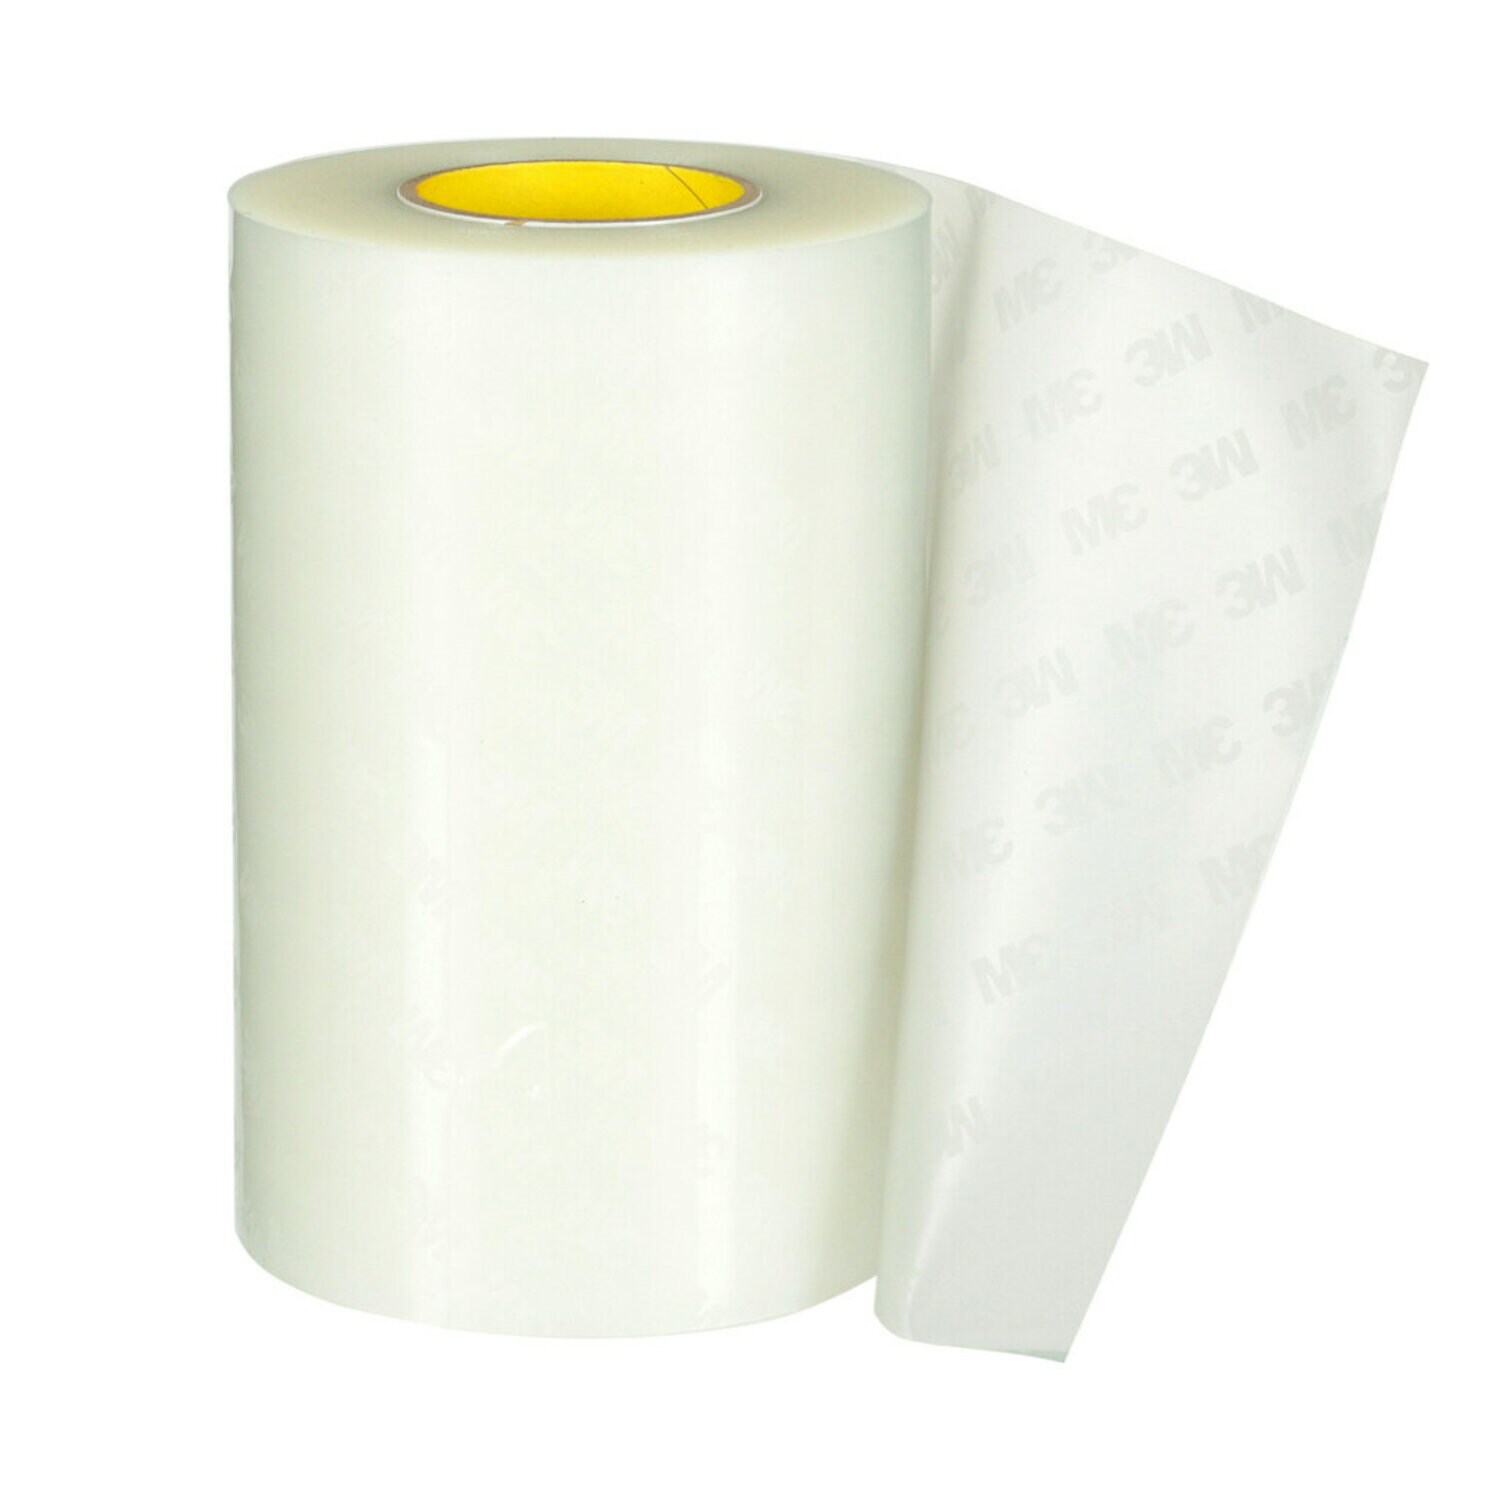 White Lamination Sheets 6.5 X 11 For Paper Rolls, 250 at Rs 6.75